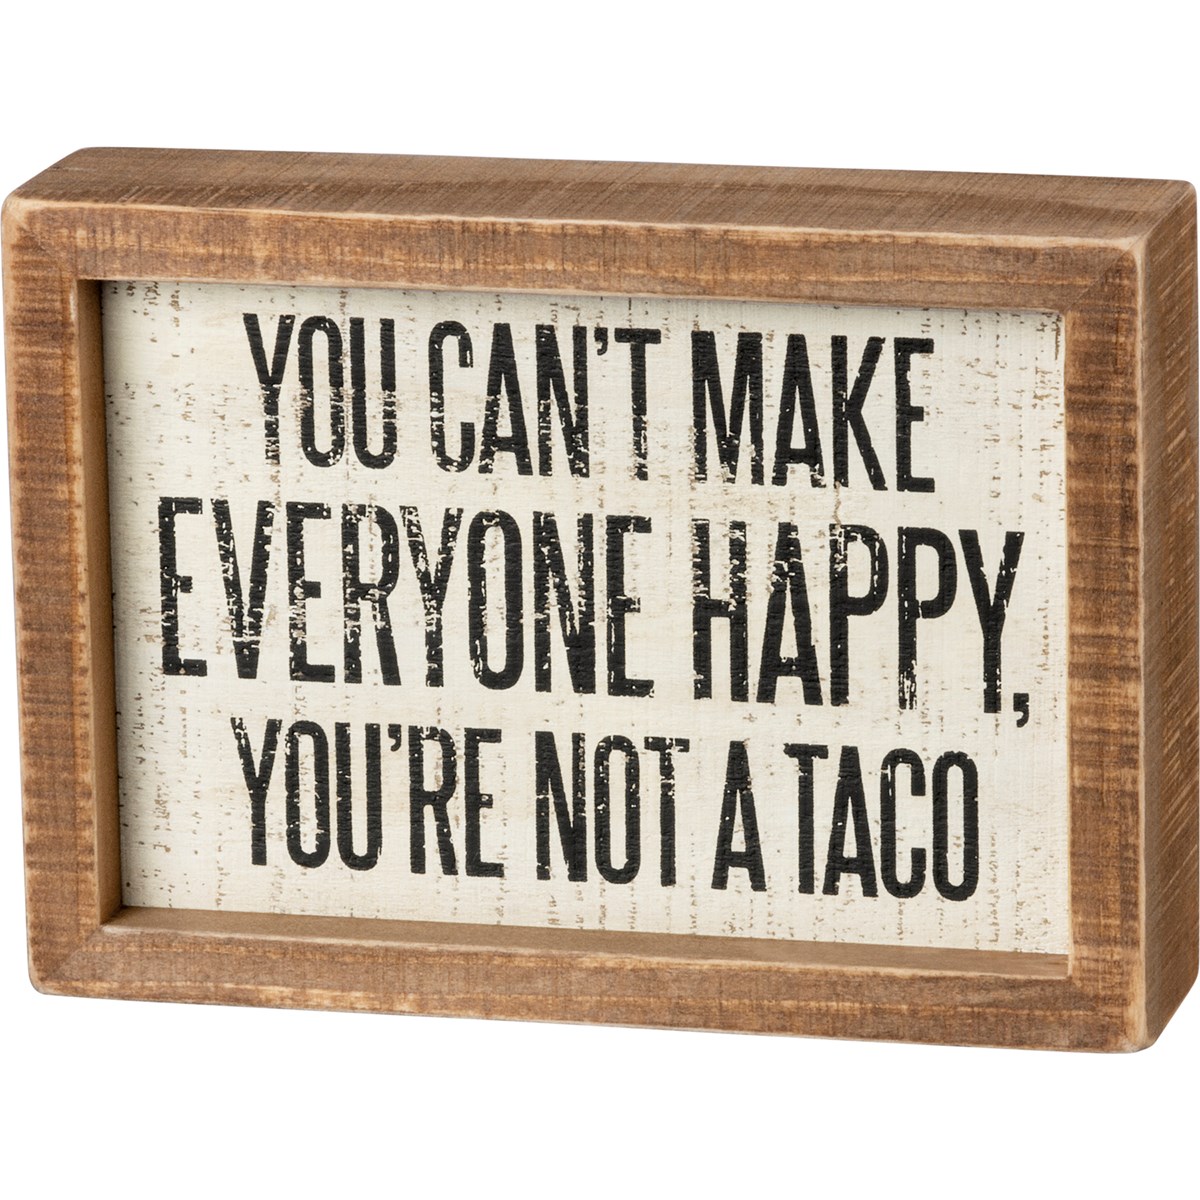 Inset Box Sign - You're Not A Taco - 7" x 5" x 1.75" - Wood